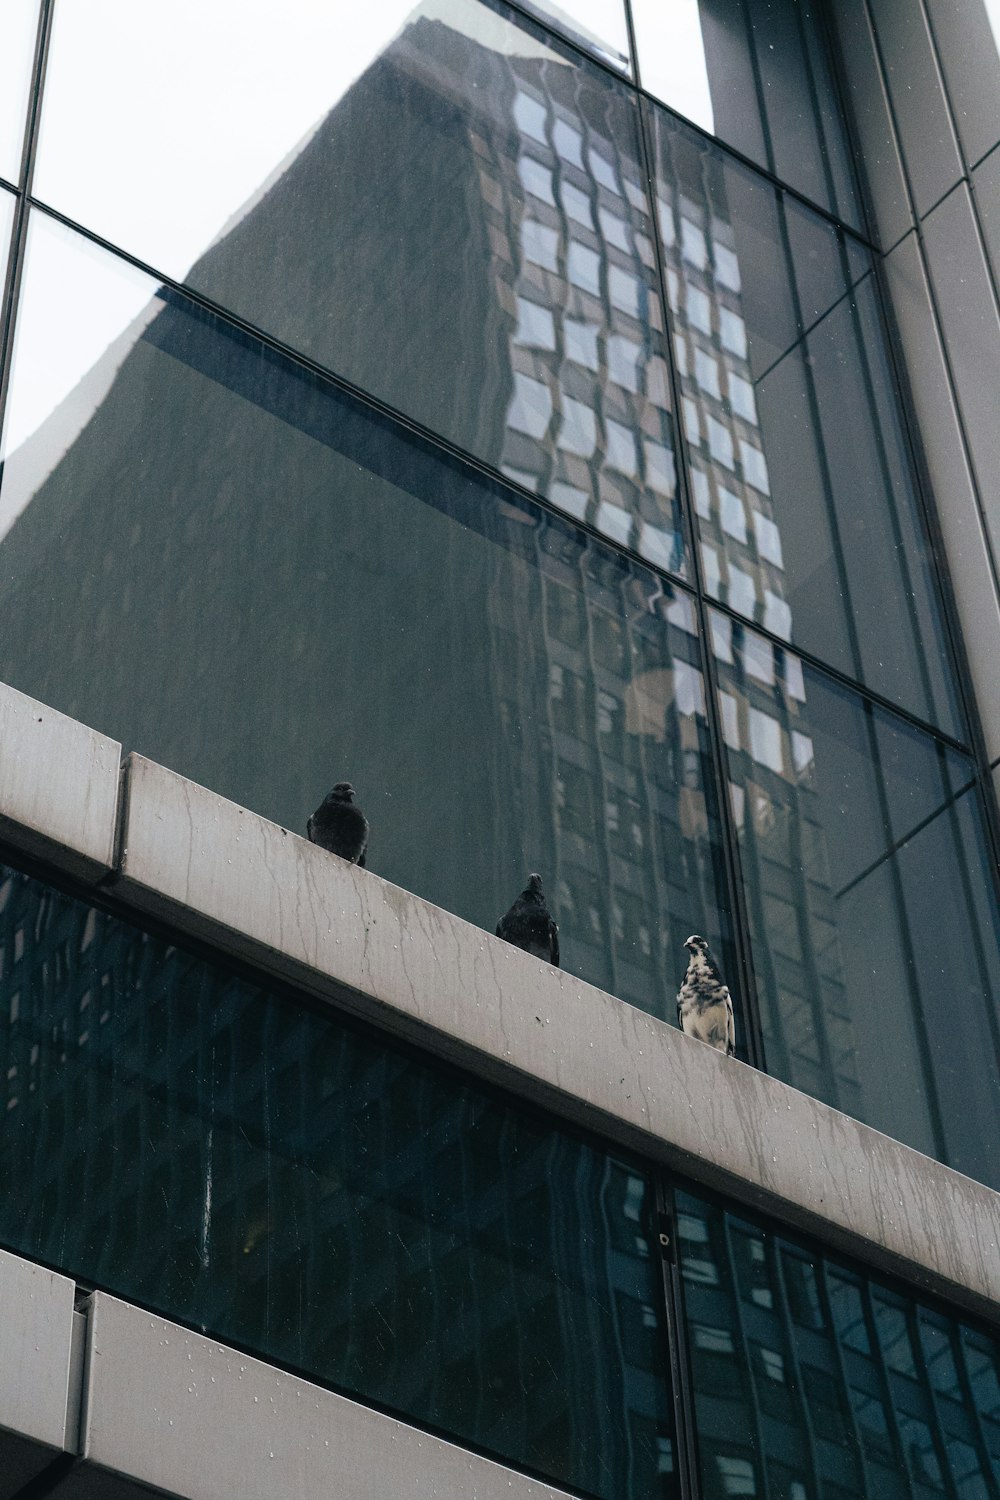 birds are sitting on the ledge of a building